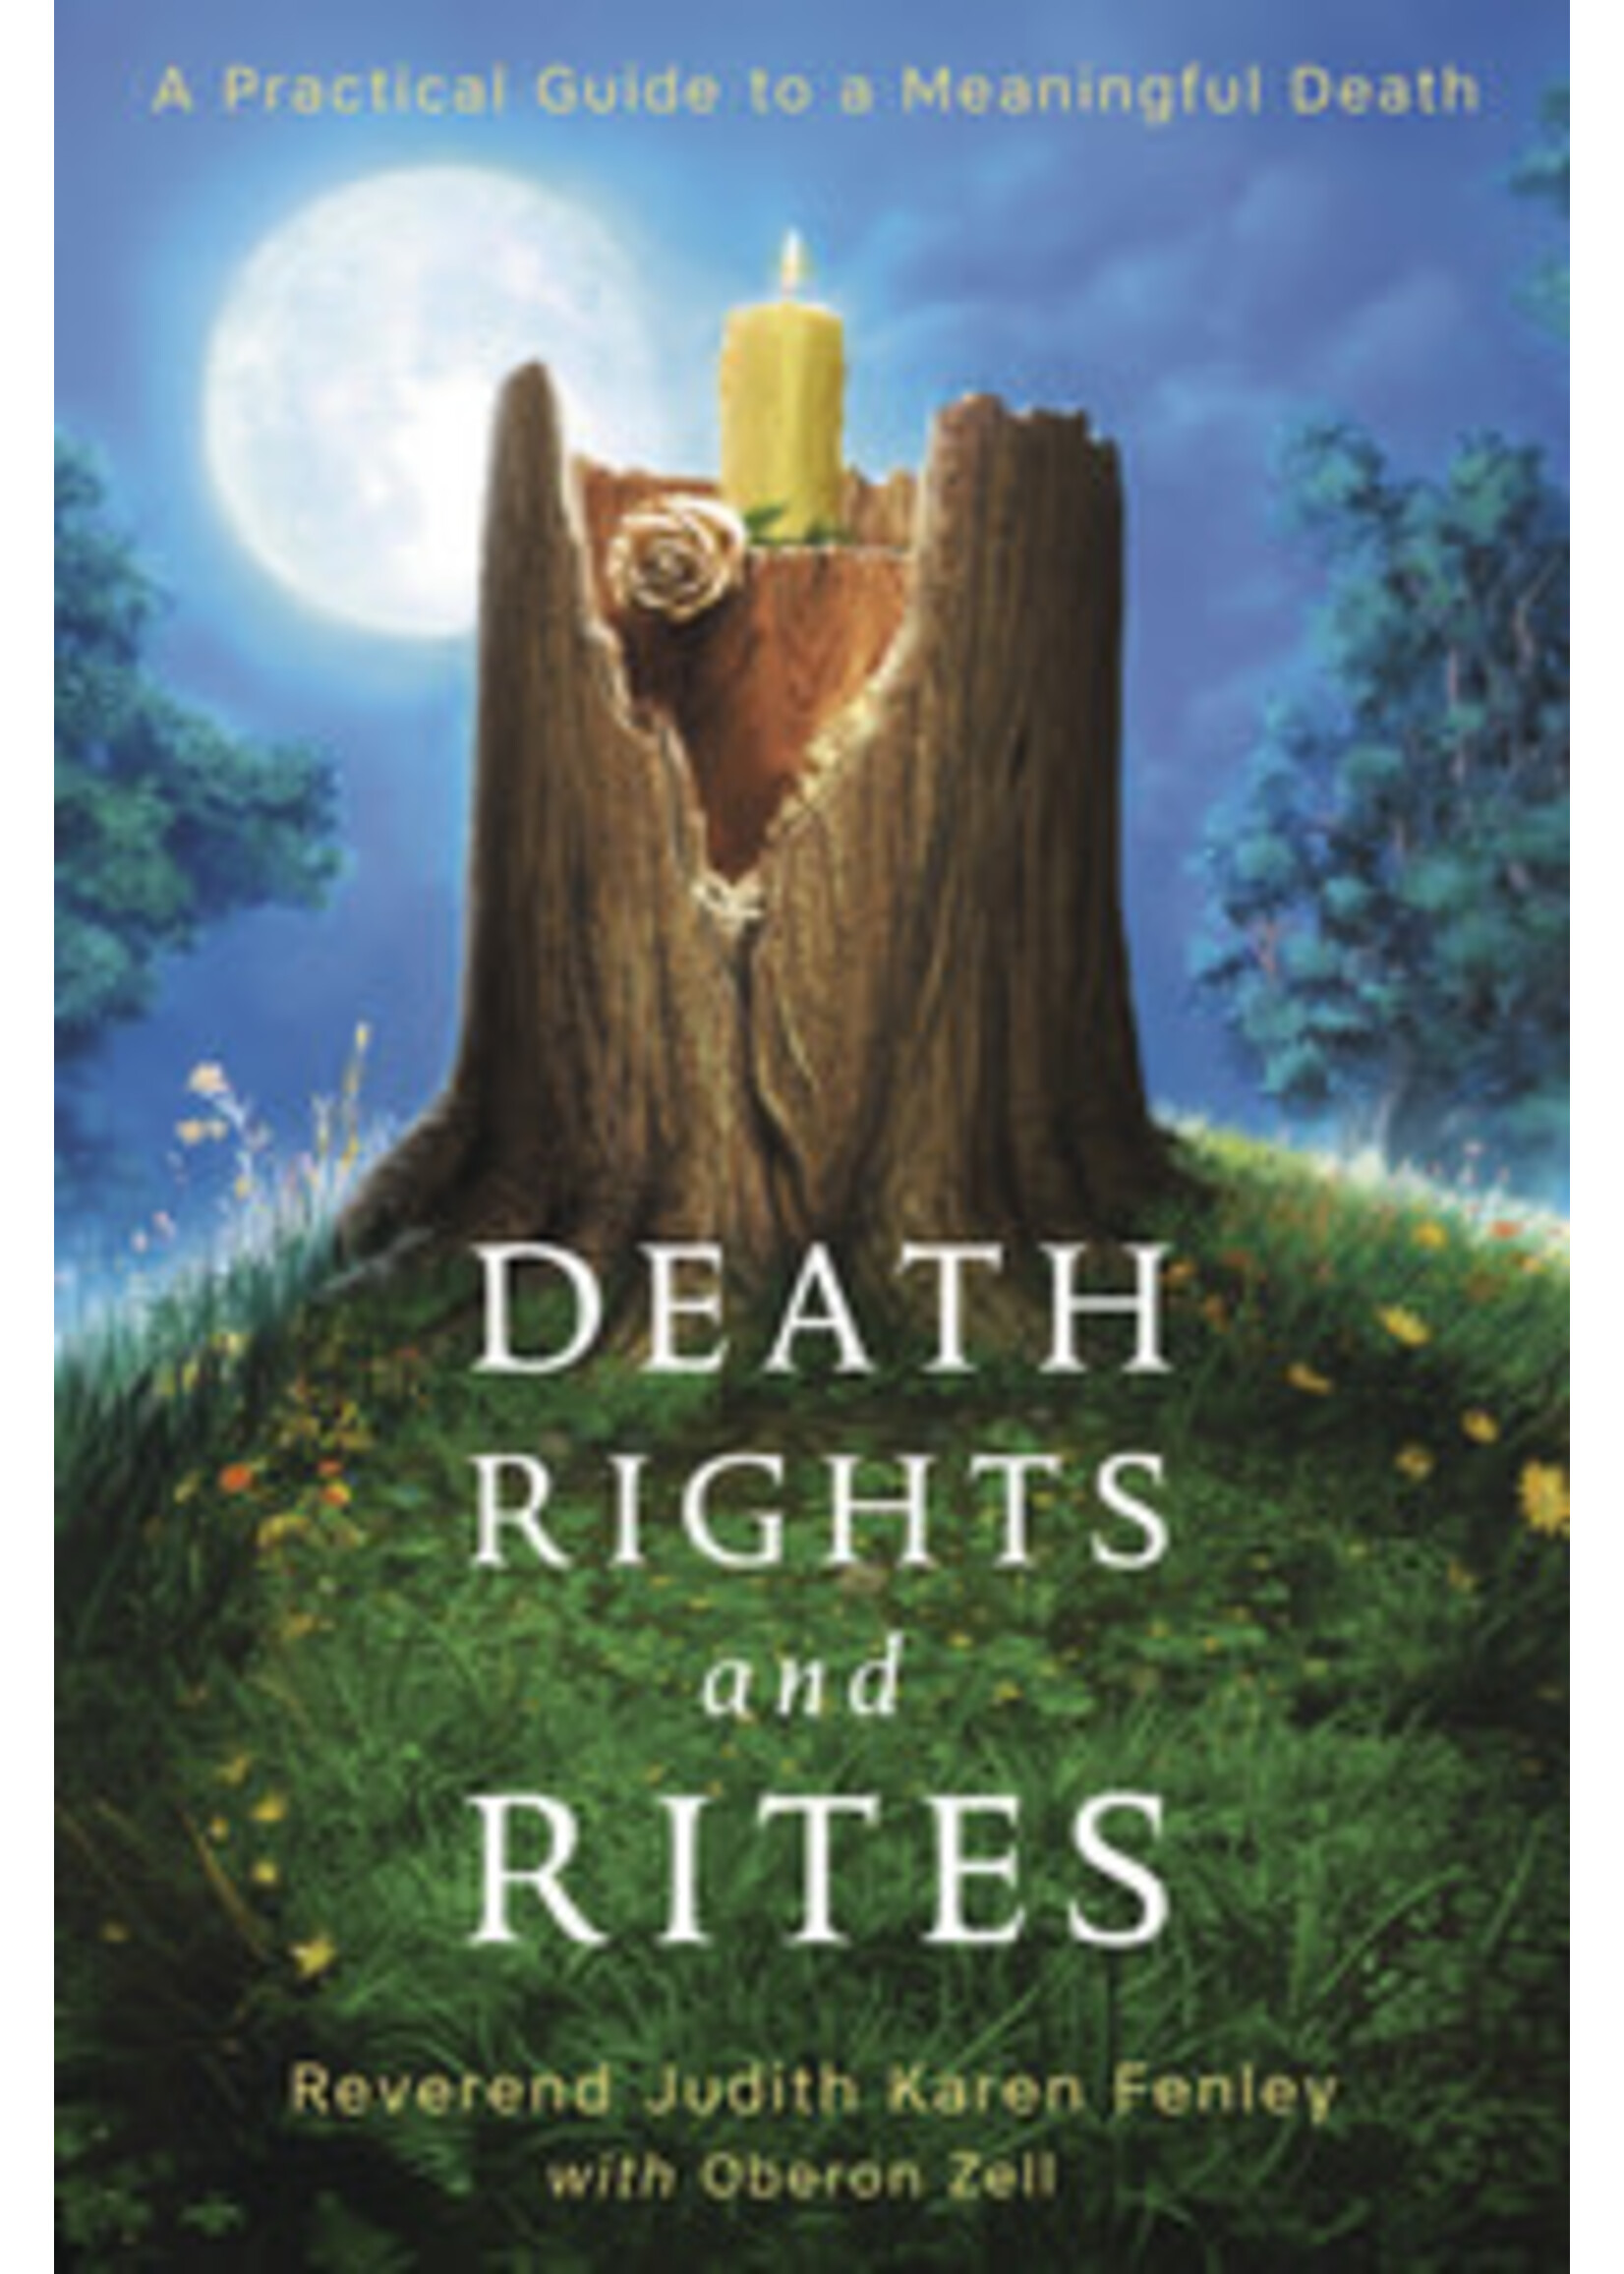 Death Rites and Rights by Reverend Judith Karen Fenley with Oberon Zell